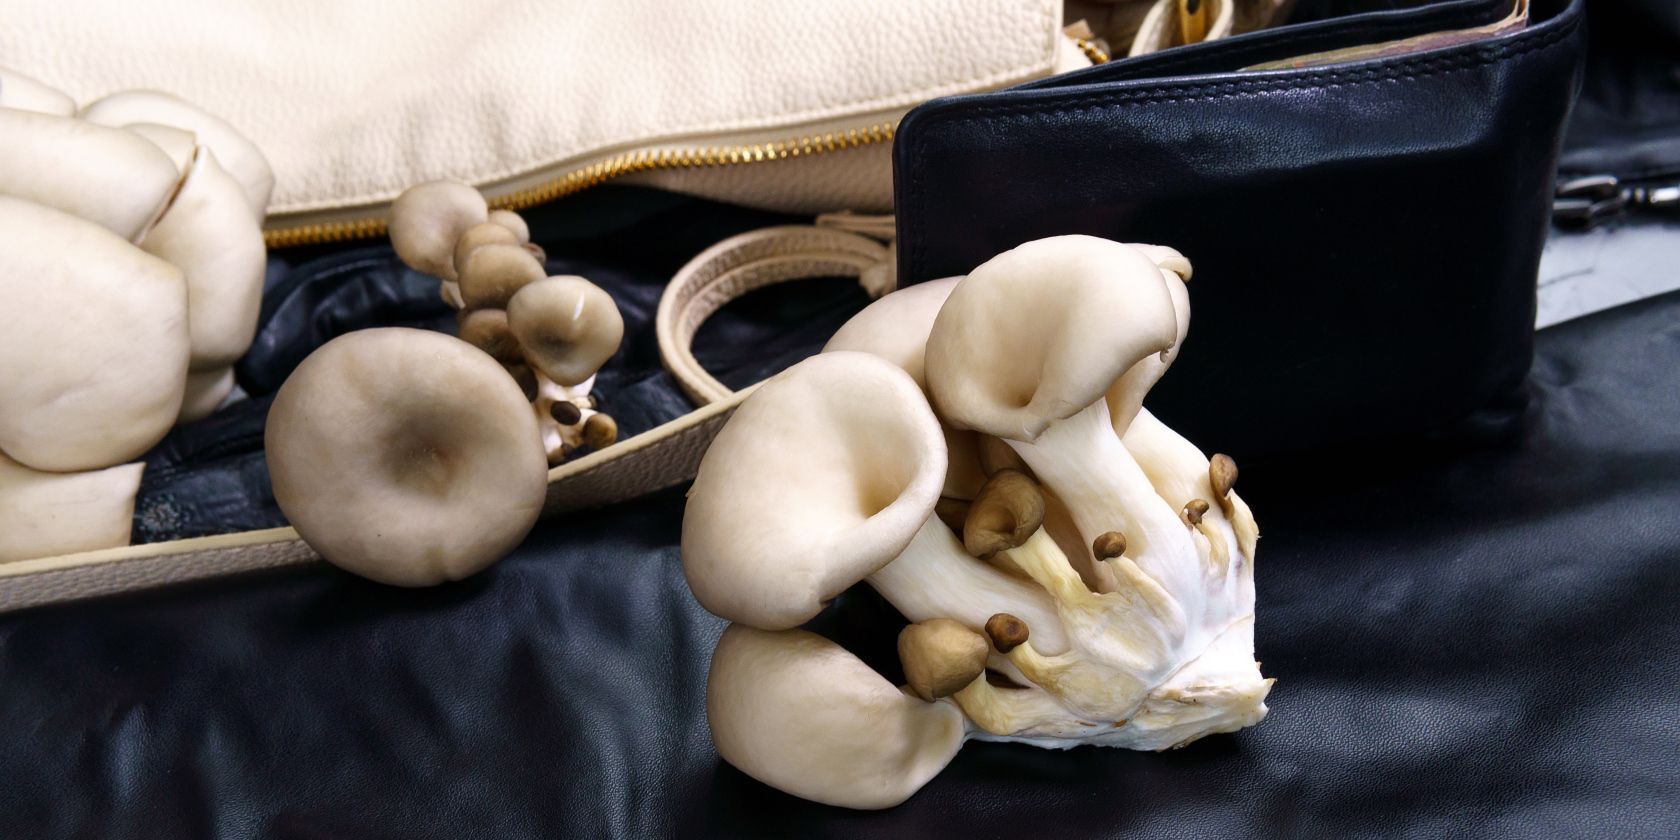 vegan leather made from mushrooms feature